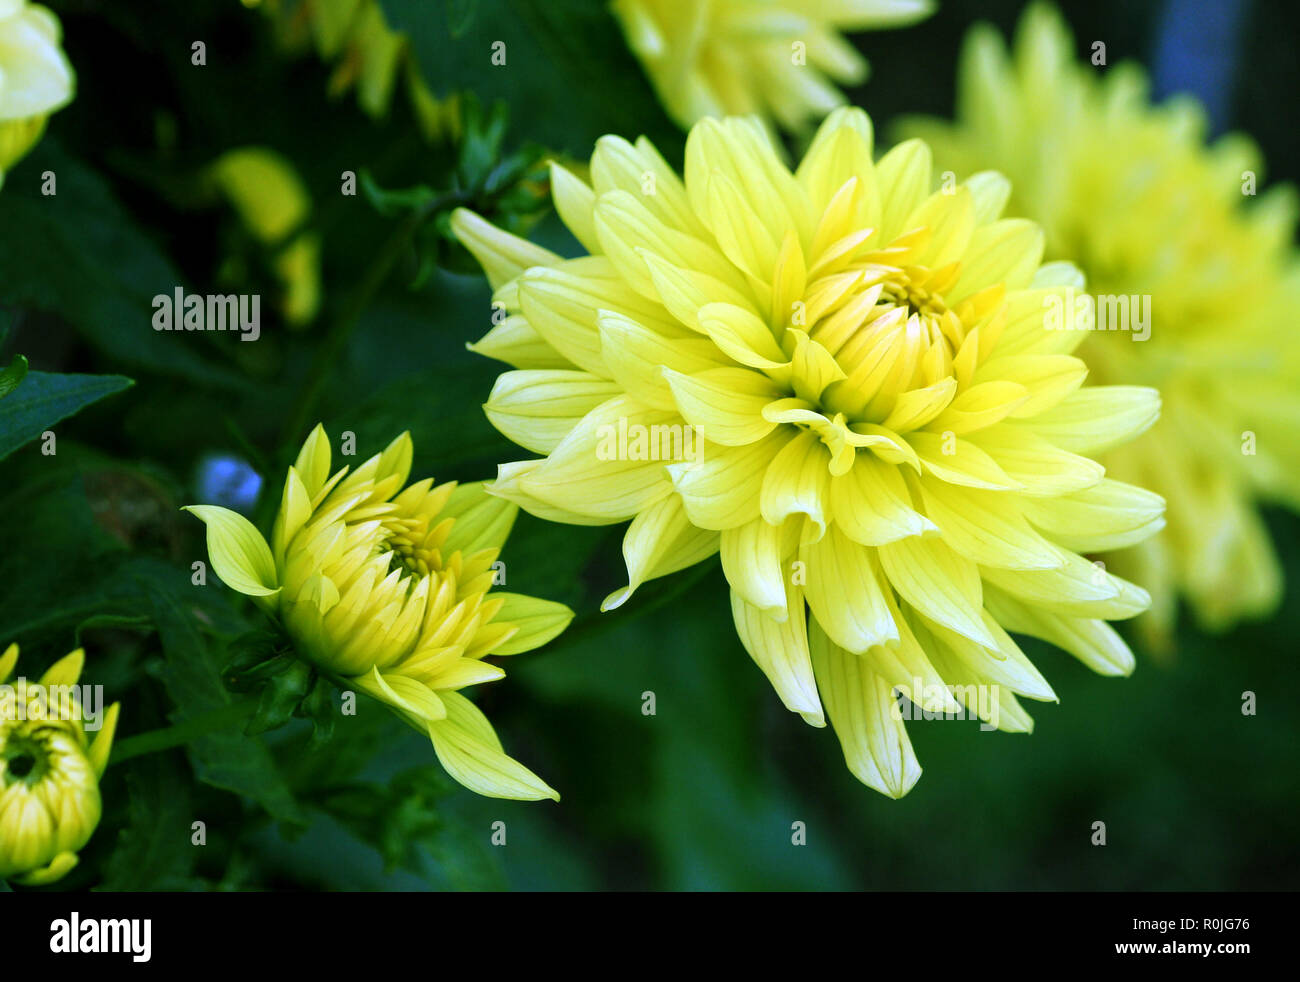 solei l a variety of yellow large chrysanthemums, dark green large foliage plants, white spots on the tips of petals, growing in a garden, daylight, Stock Photo